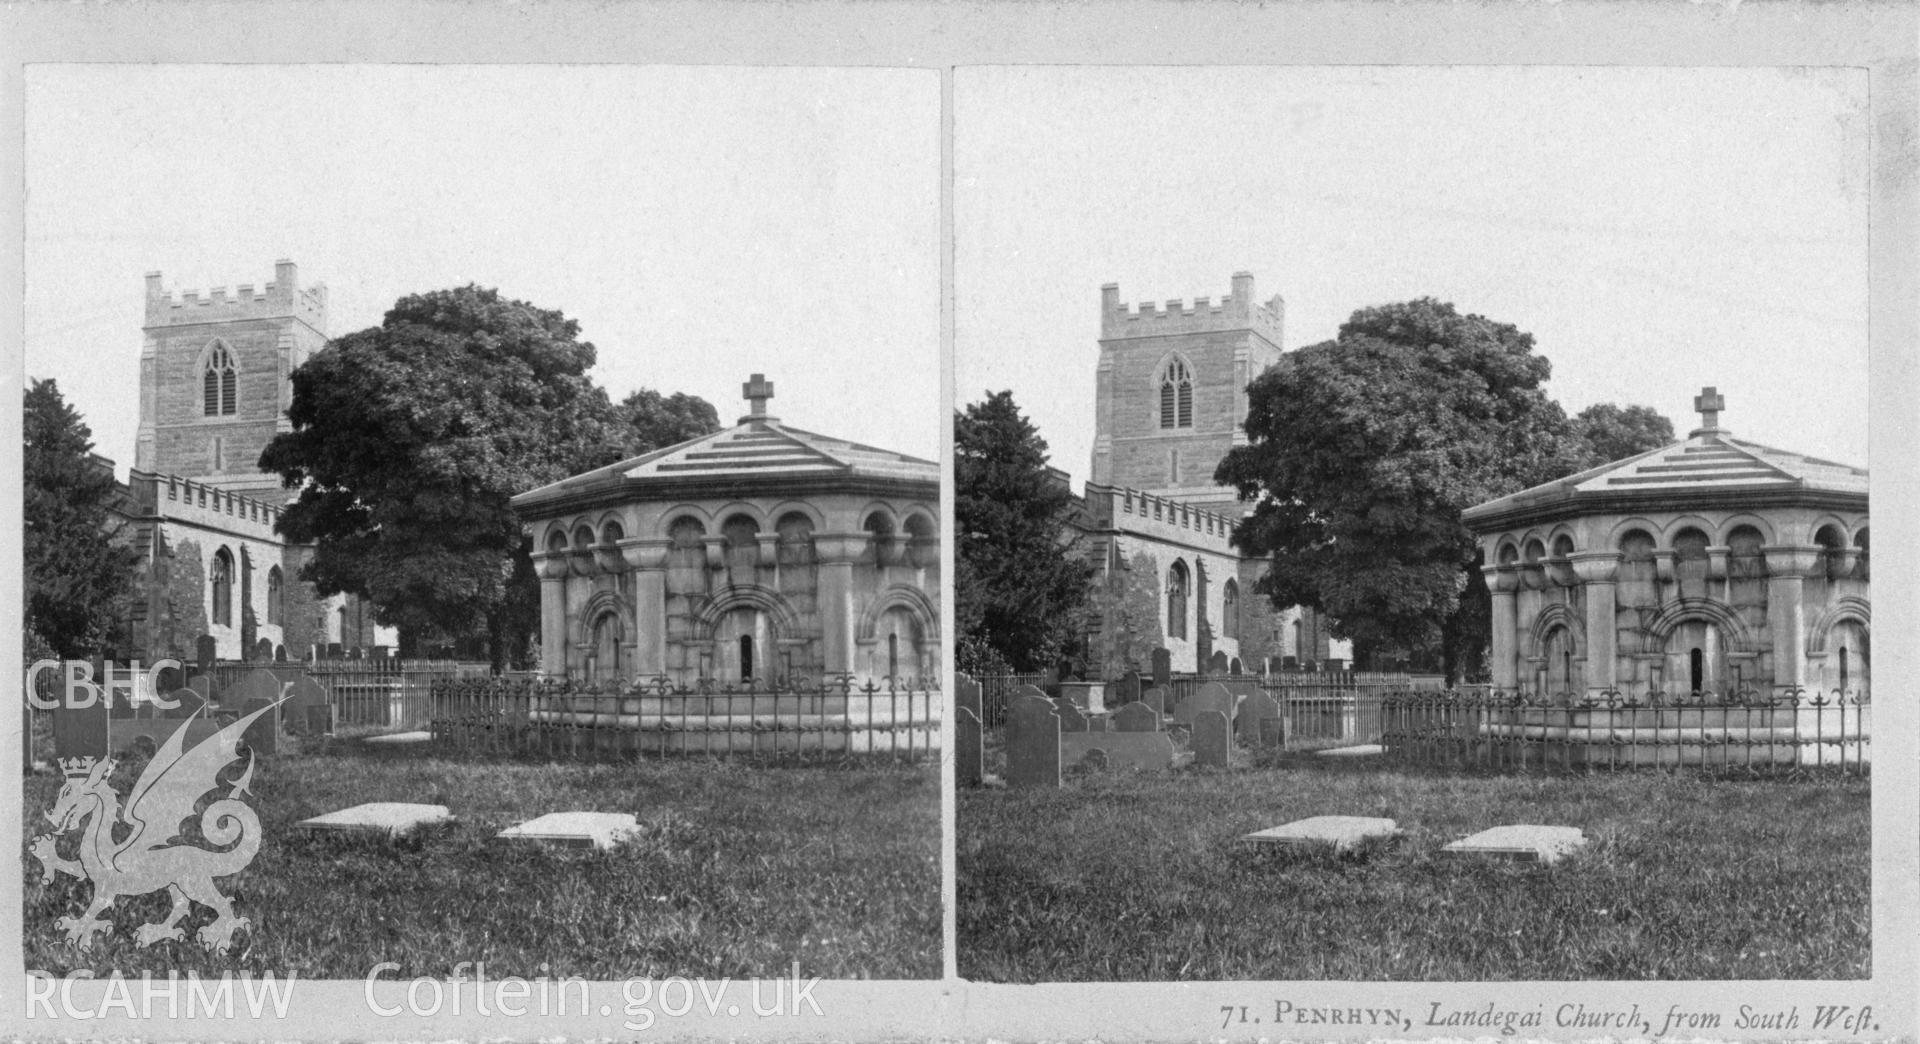 Black and white print of St. Tegai's Church, Llandegai, showing the Penrhyn family mausoleum, copied from an original stereoscopic print in the possession of Thomas Lloyd. Negative held.